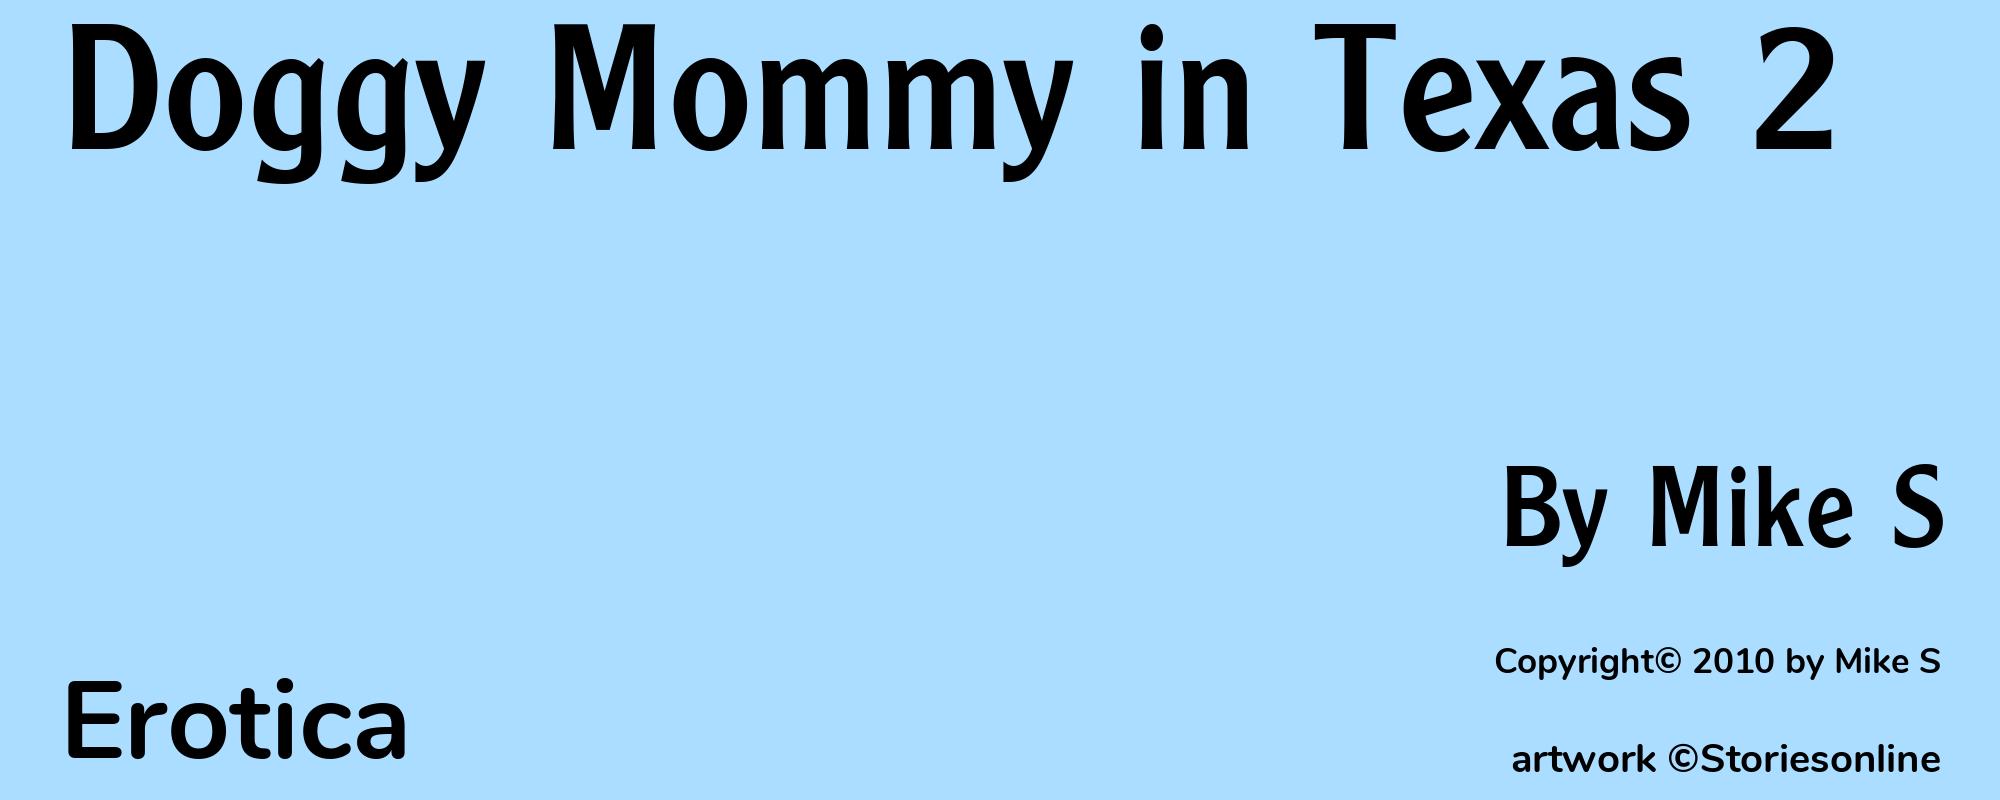 Doggy Mommy in Texas 2 - Cover